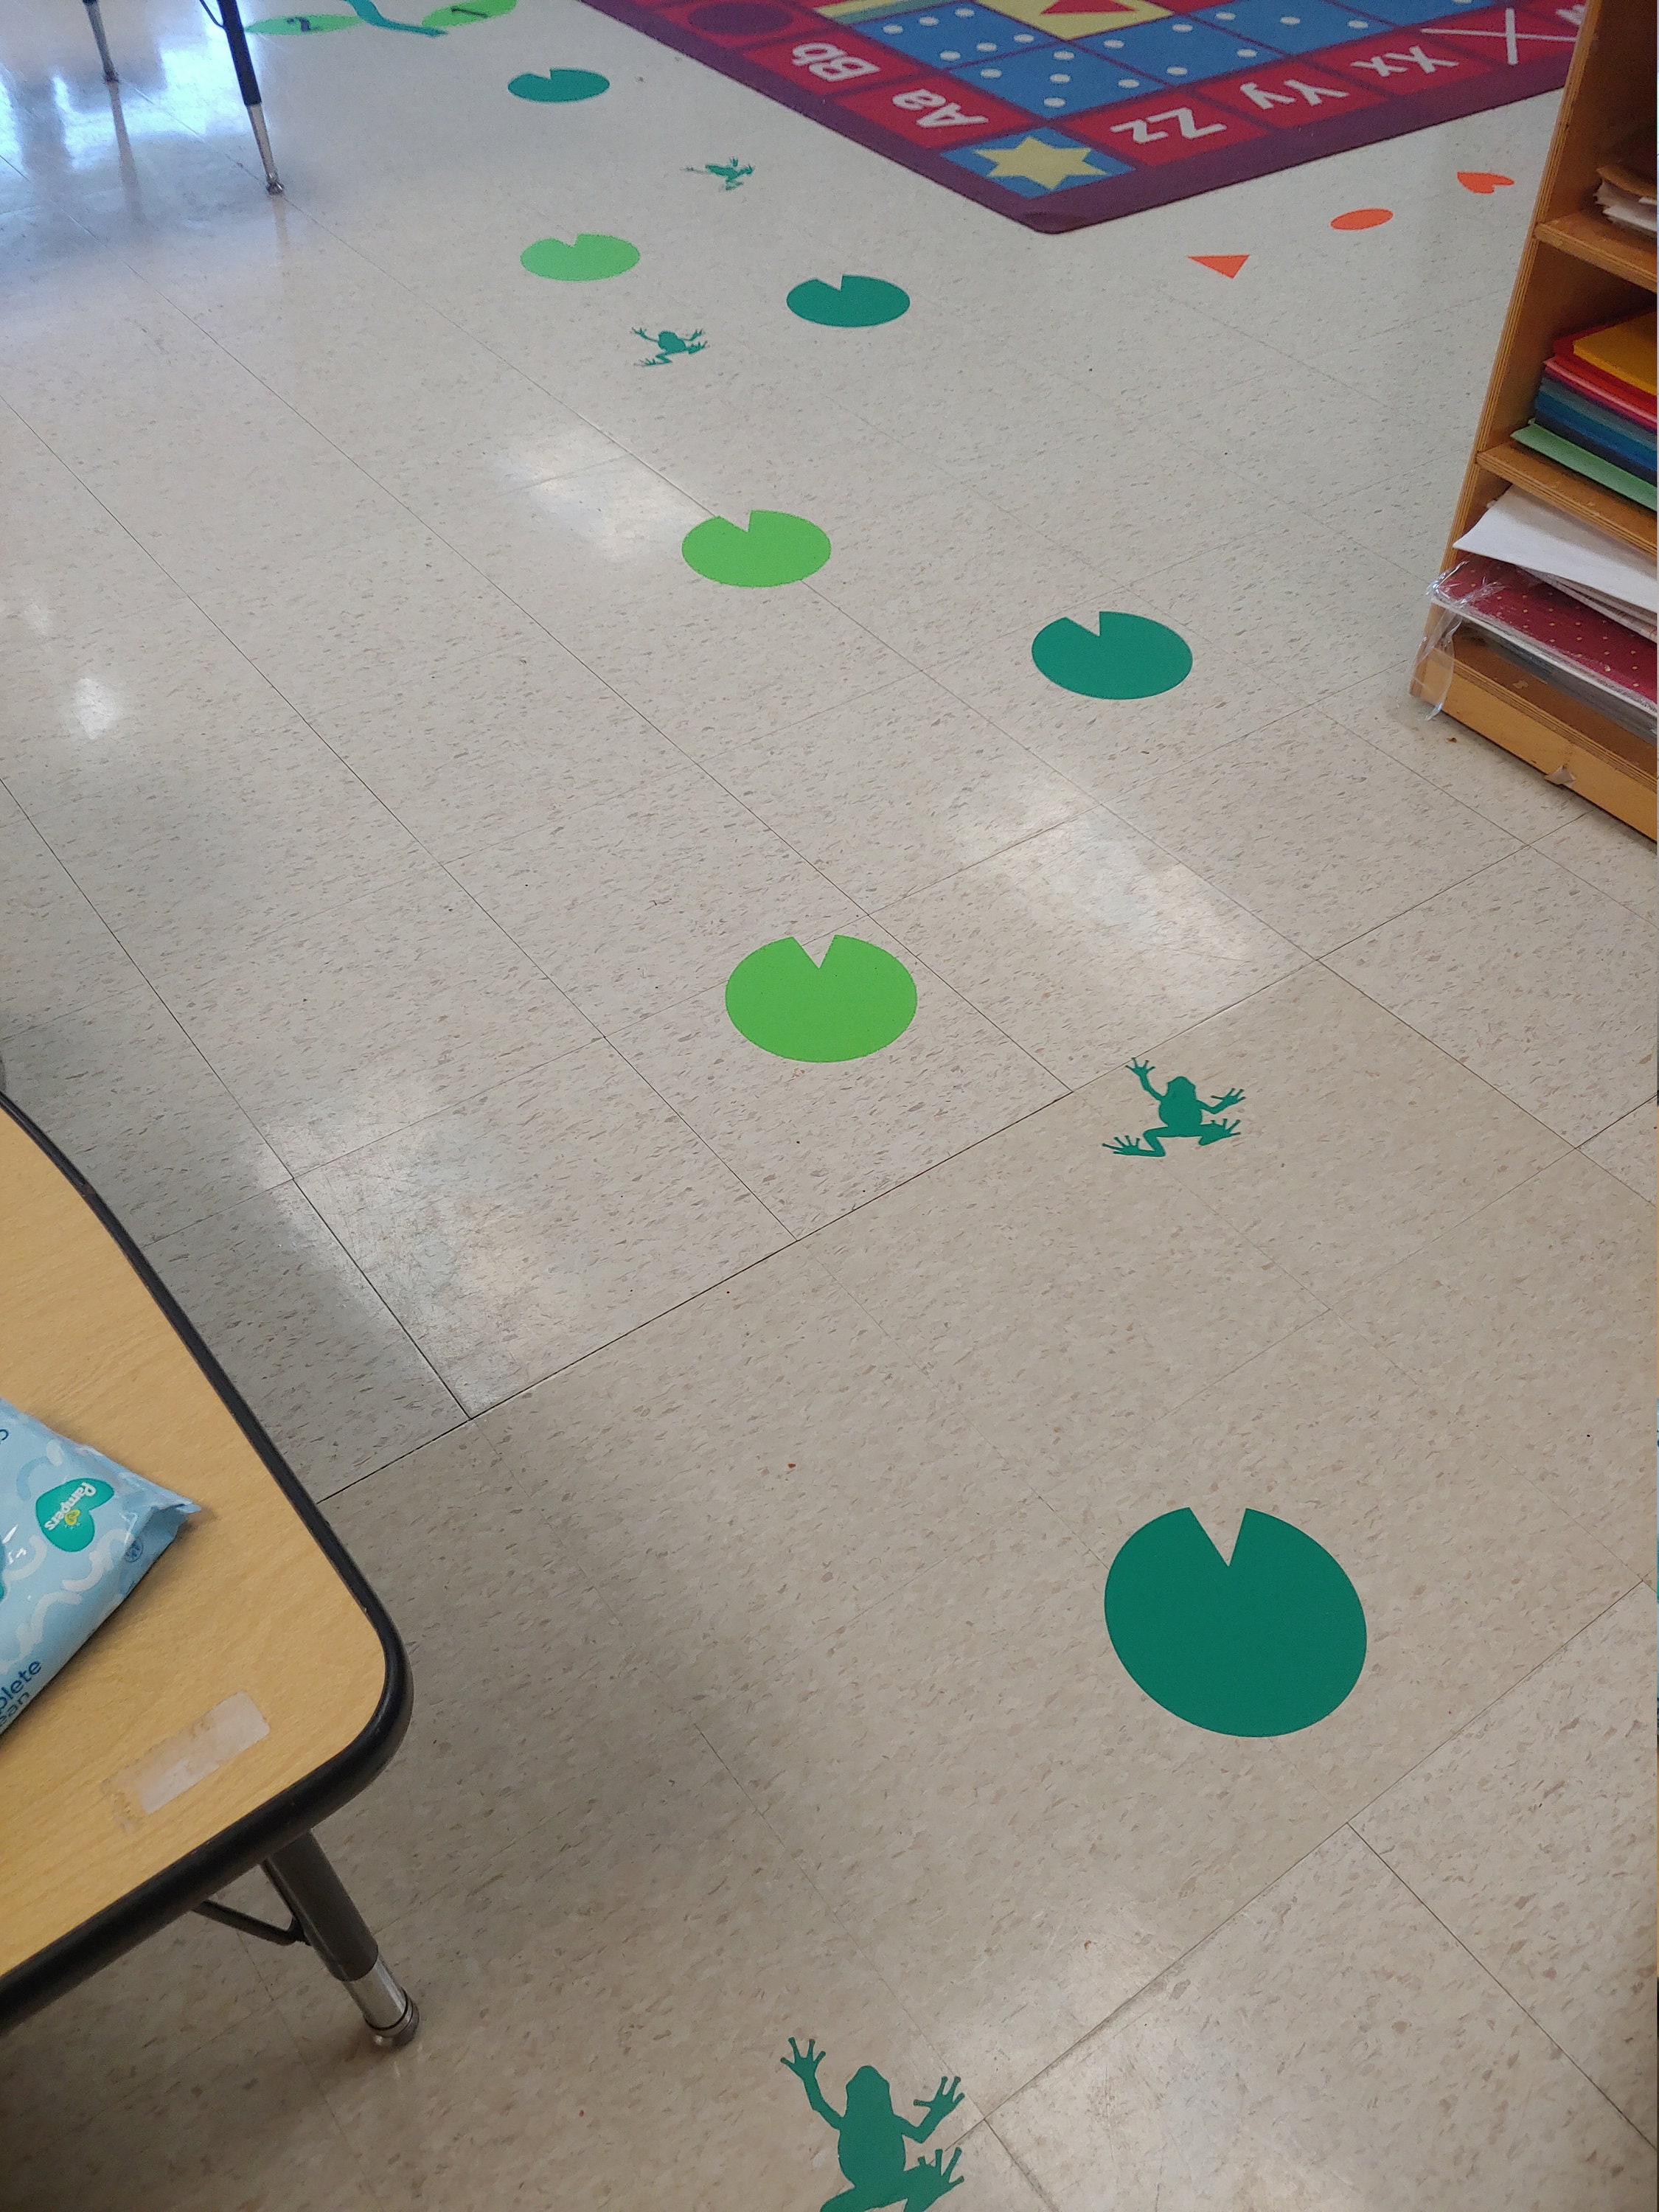 Understanding Why, How, When to Use a Sensory Path: Lily Pads